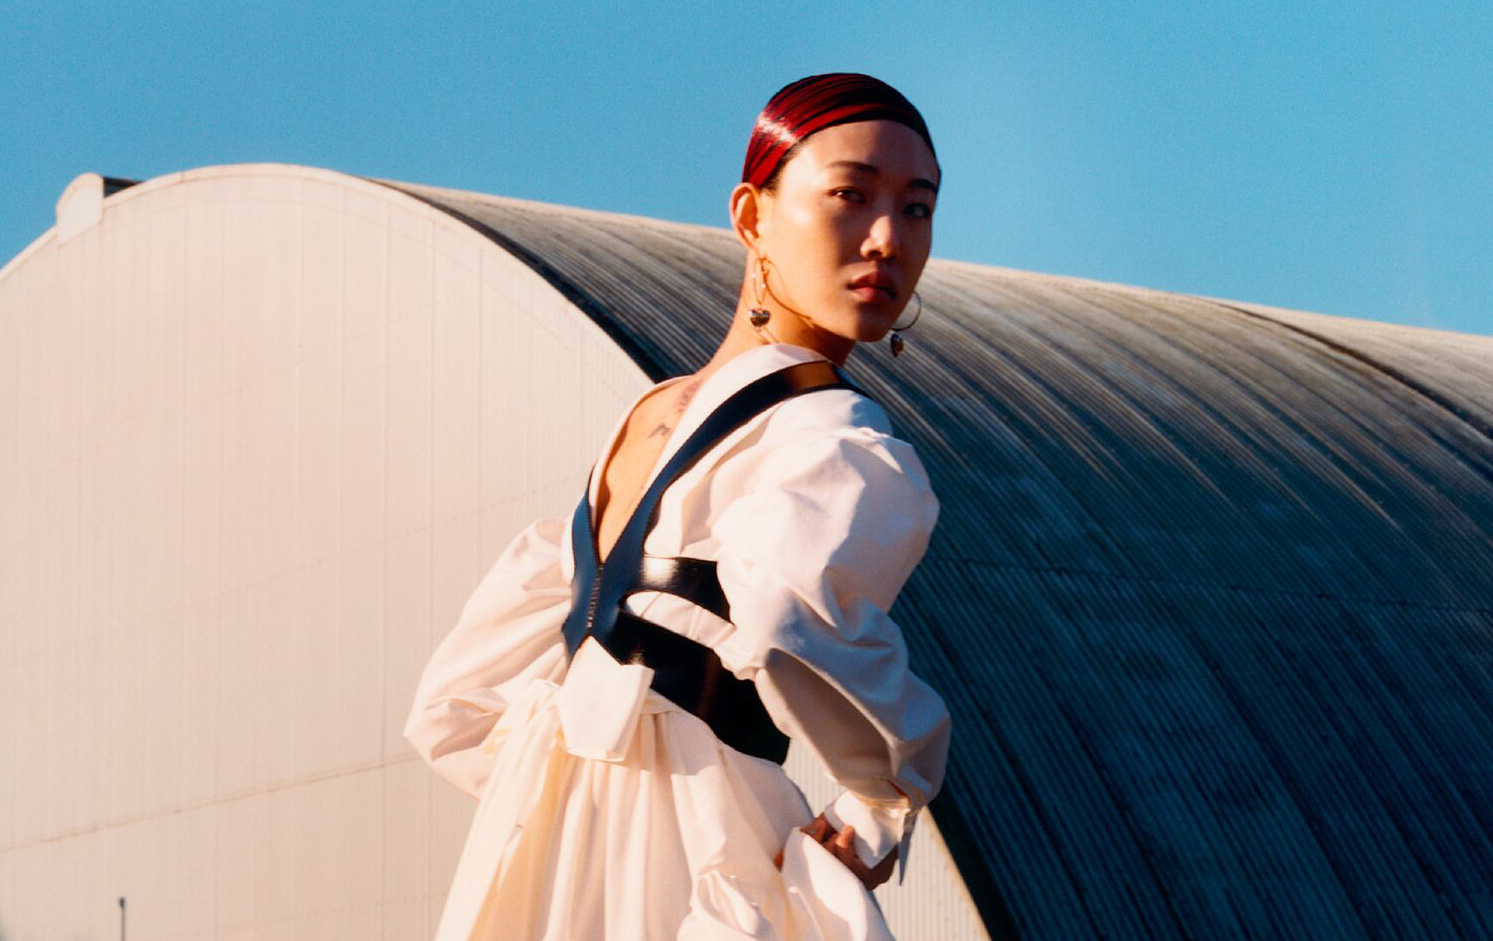 Alexander McQueen - The #AlexanderMcQueen Autumn/Winter 2020 campaign  featuring Anok Yai, Sora Choi and Jill Kortleve, photographed by Jamie  Hawkesworth and art directed by M/M Paris. Discover the #McQueenAW20  collection: on.alexandermcqueen.com